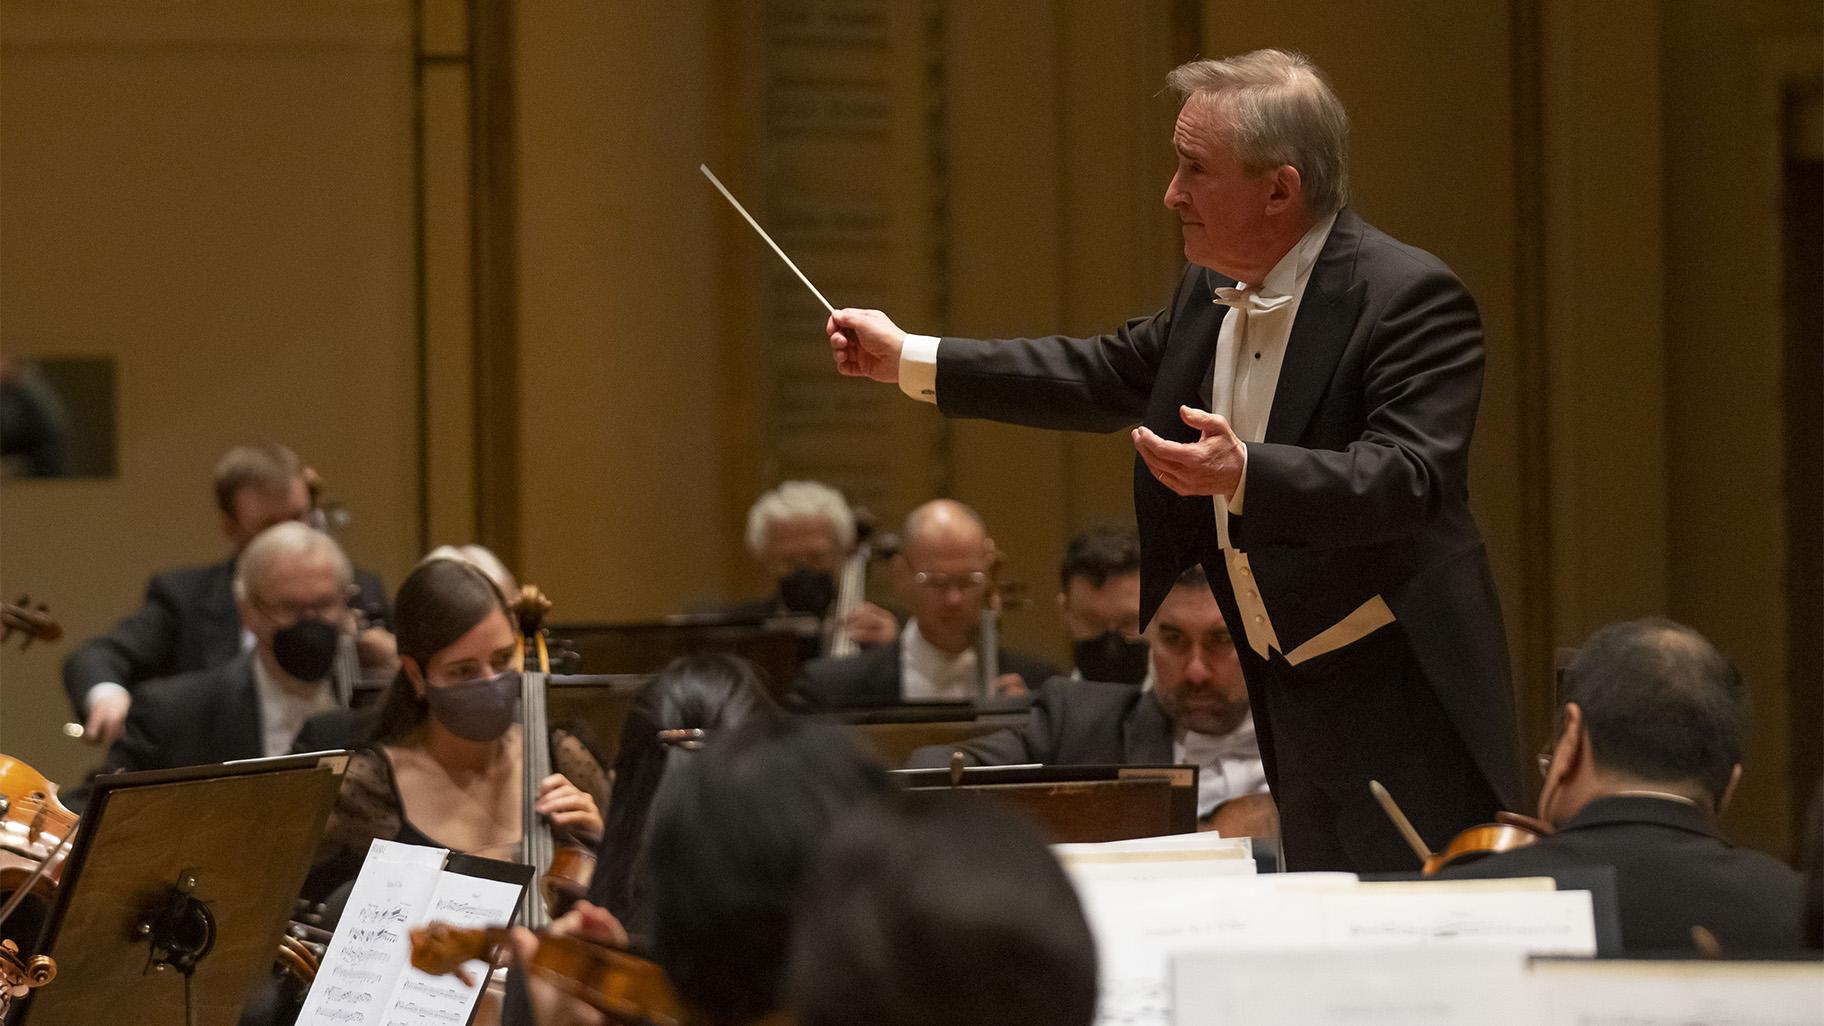 Guest conductor James Conlon leads the Chicago Symphony Orchestra in Schubert’s Symphony No. 3. (Credit Todd Rosenberg Photography)